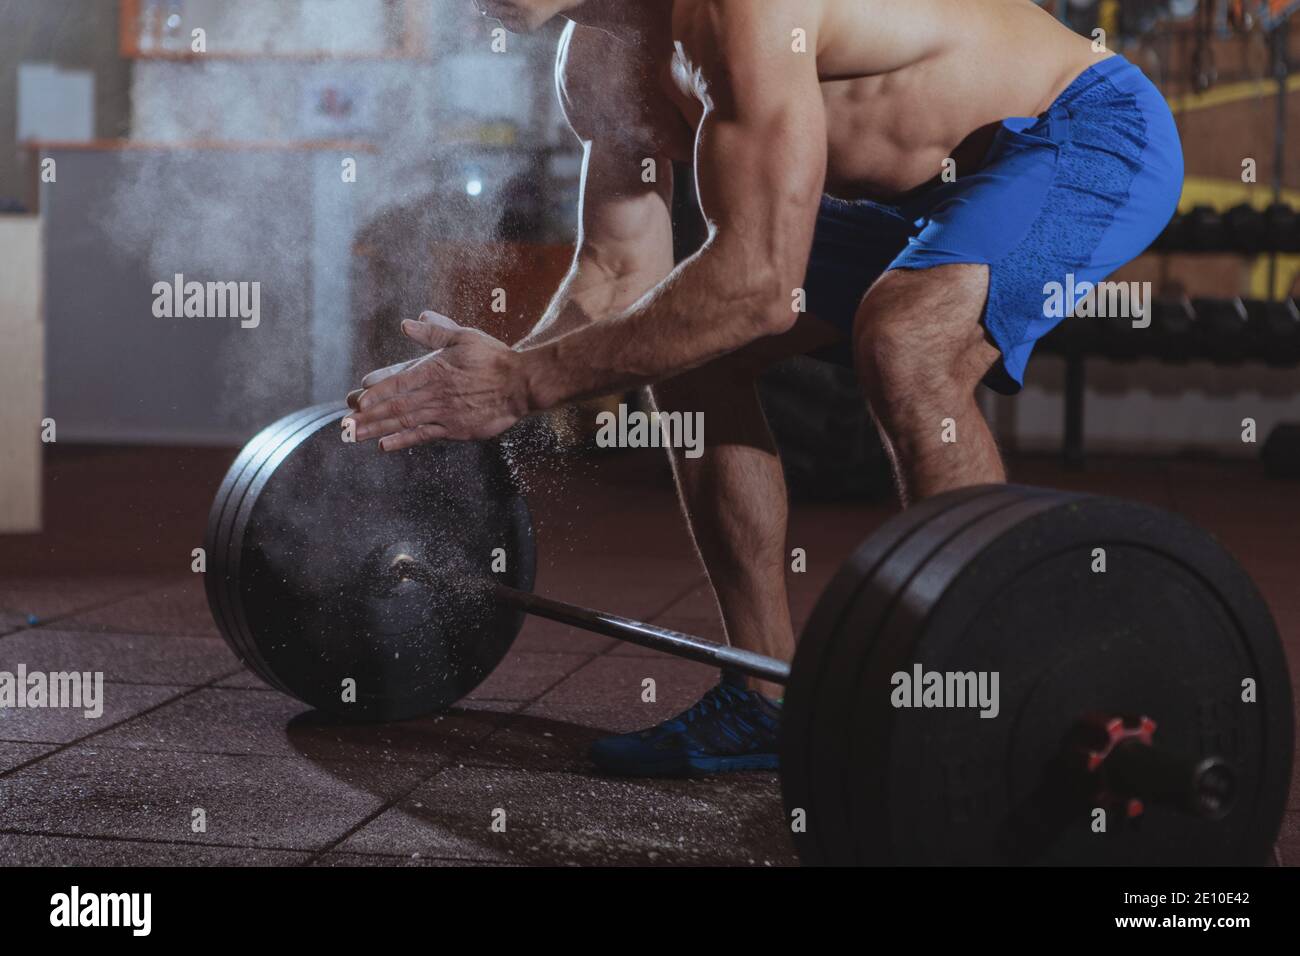 https://c8.alamy.com/comp/2E10E42/cropped-shot-of-male-crossfit-athlete-using-magnesium-clapping-hands-before-lifting-heavy-barbell-unrecognizable-shirtless-muscular-man-chalking-han-2E10E42.jpg